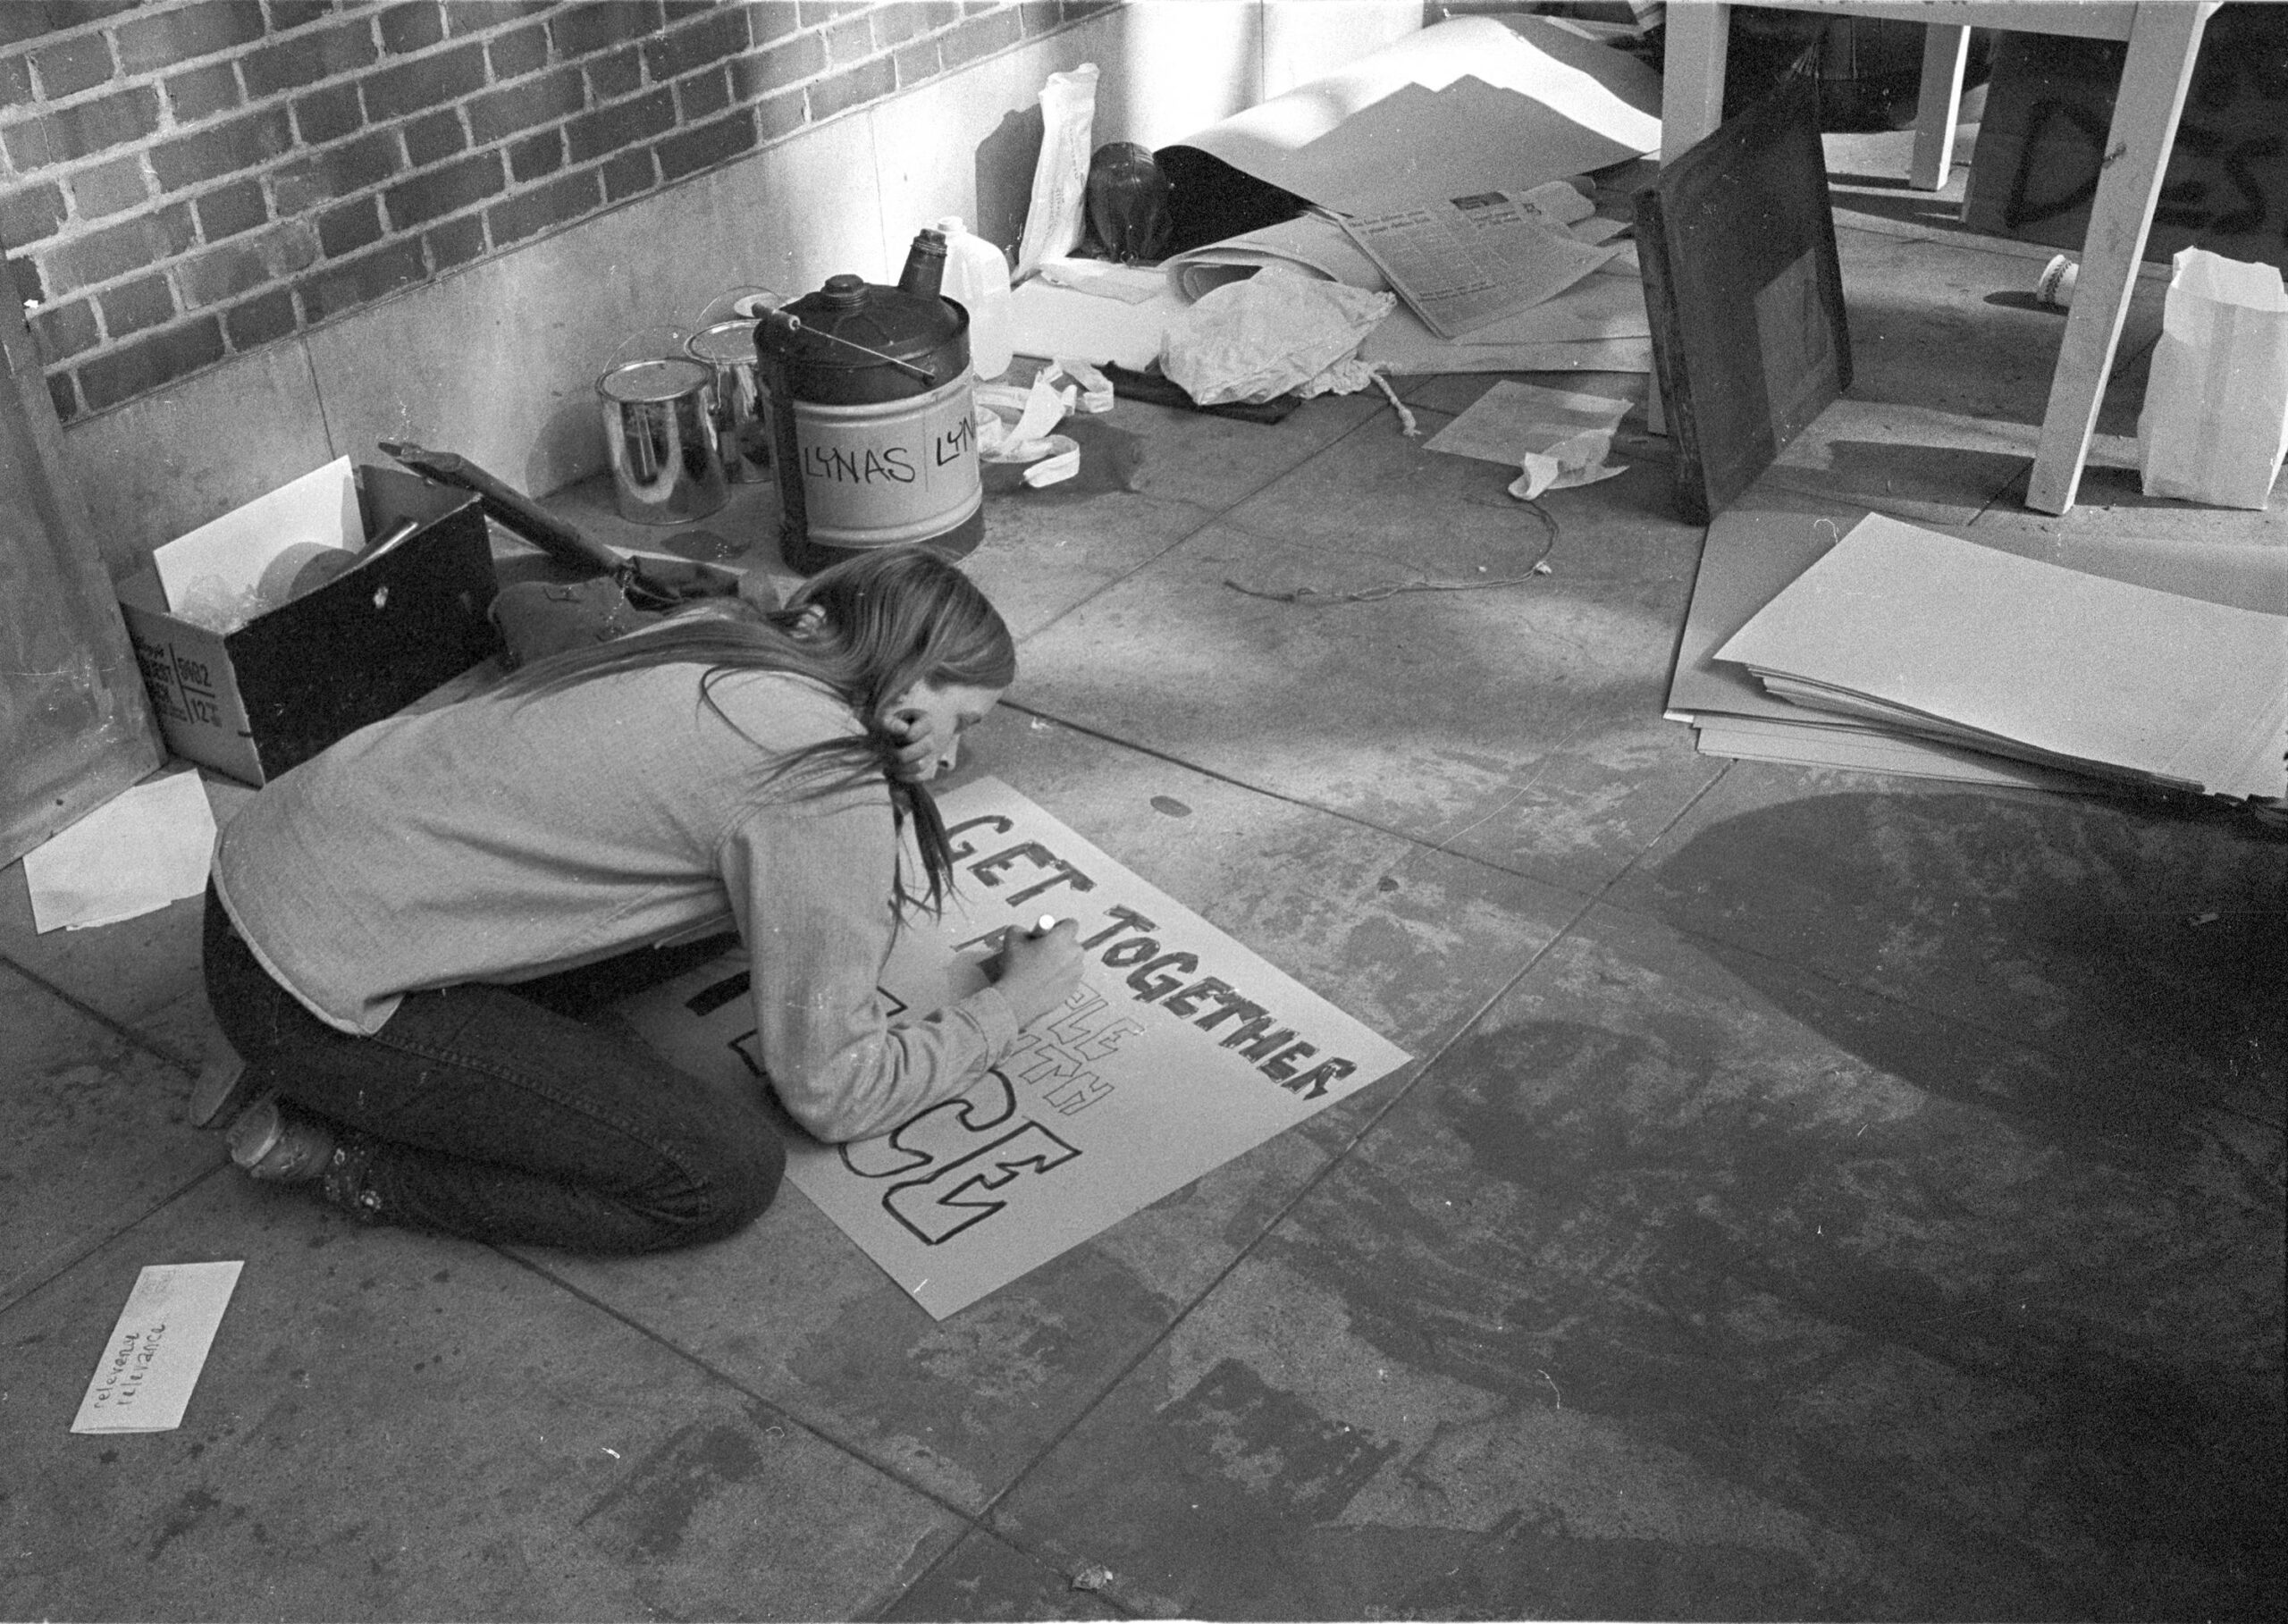 Student at rally creating a sign to promote peace